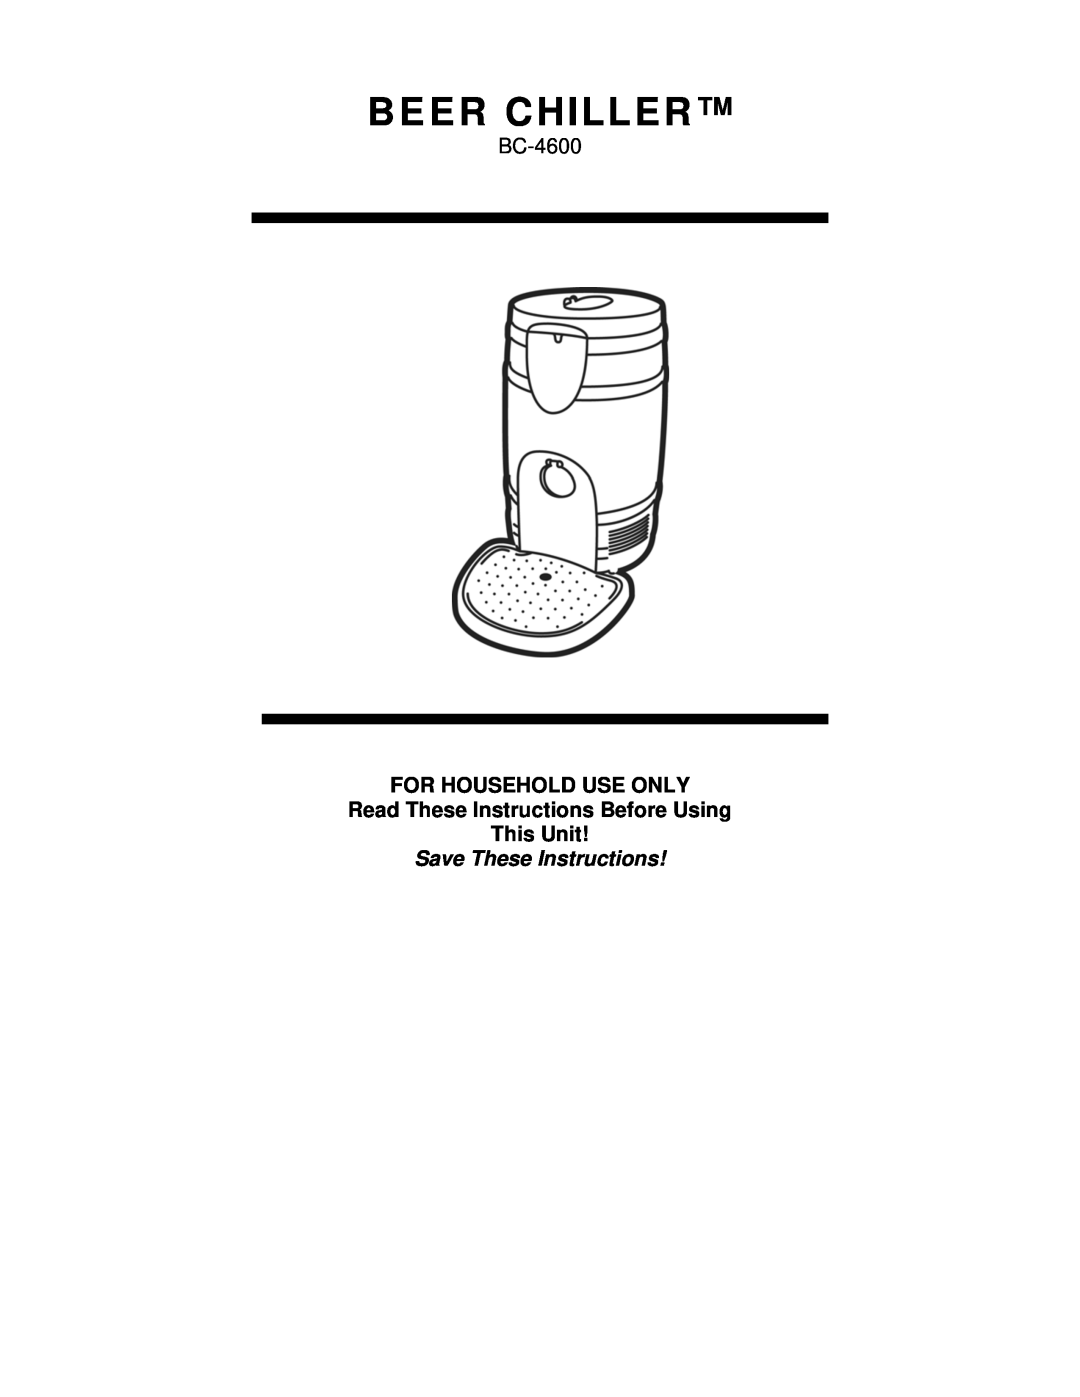 Nostalgia Electrics BC-4600 manual For Household Use Only, Read These Instructions Before Using This Unit, Beer Chiller 